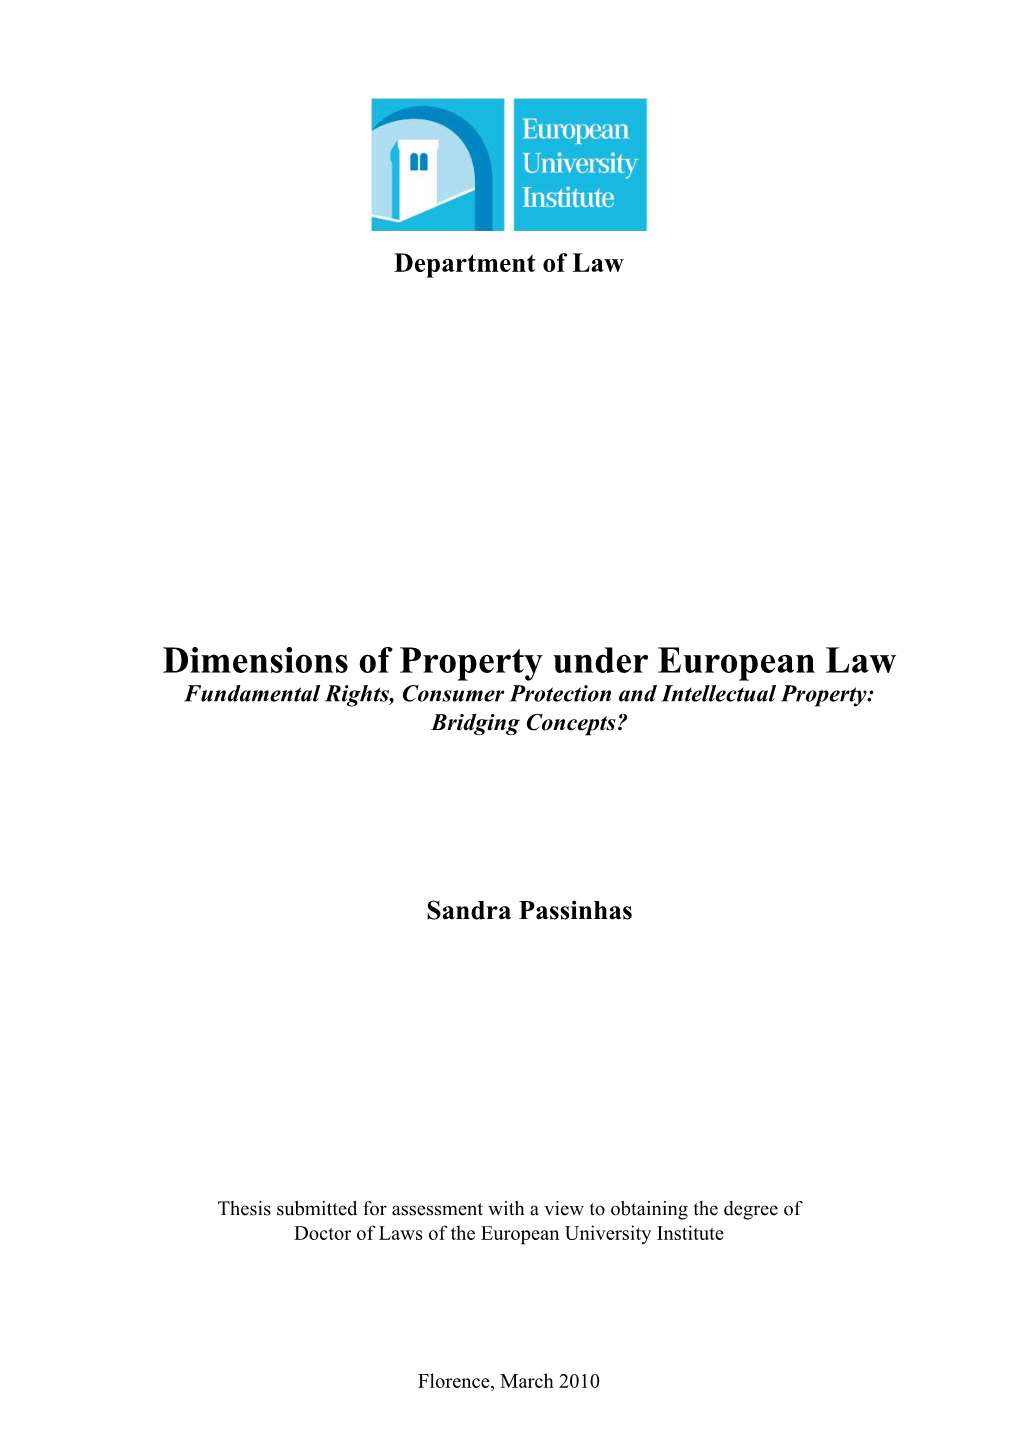 Dimensions of Property Under European Law Fundamental Rights, Consumer Protection and Intellectual Property: Bridging Concepts?